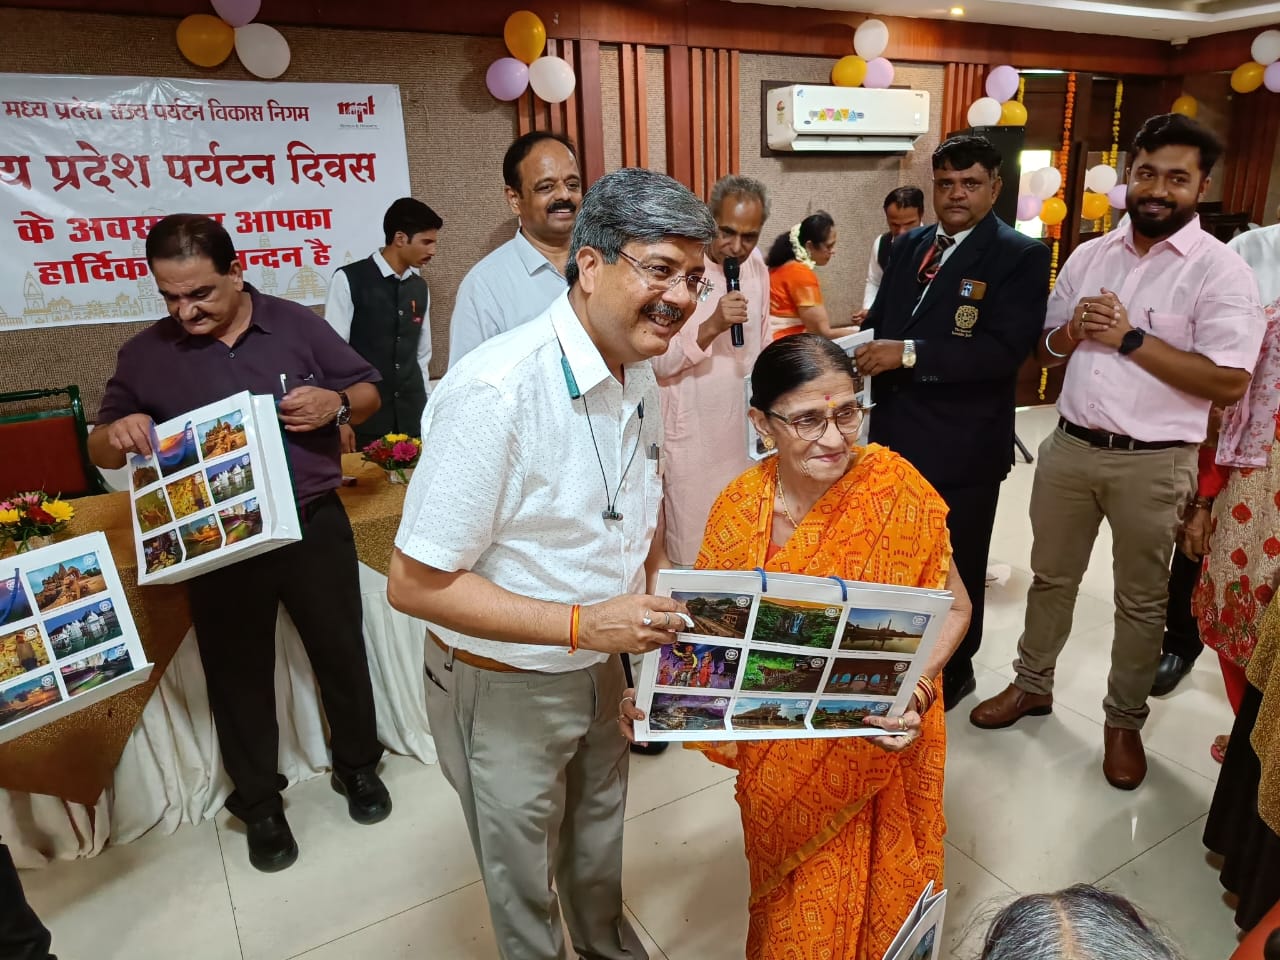 “Madhya Pradesh Tourism celebrated its Foundation Day with differently-abled children and elderly people.”